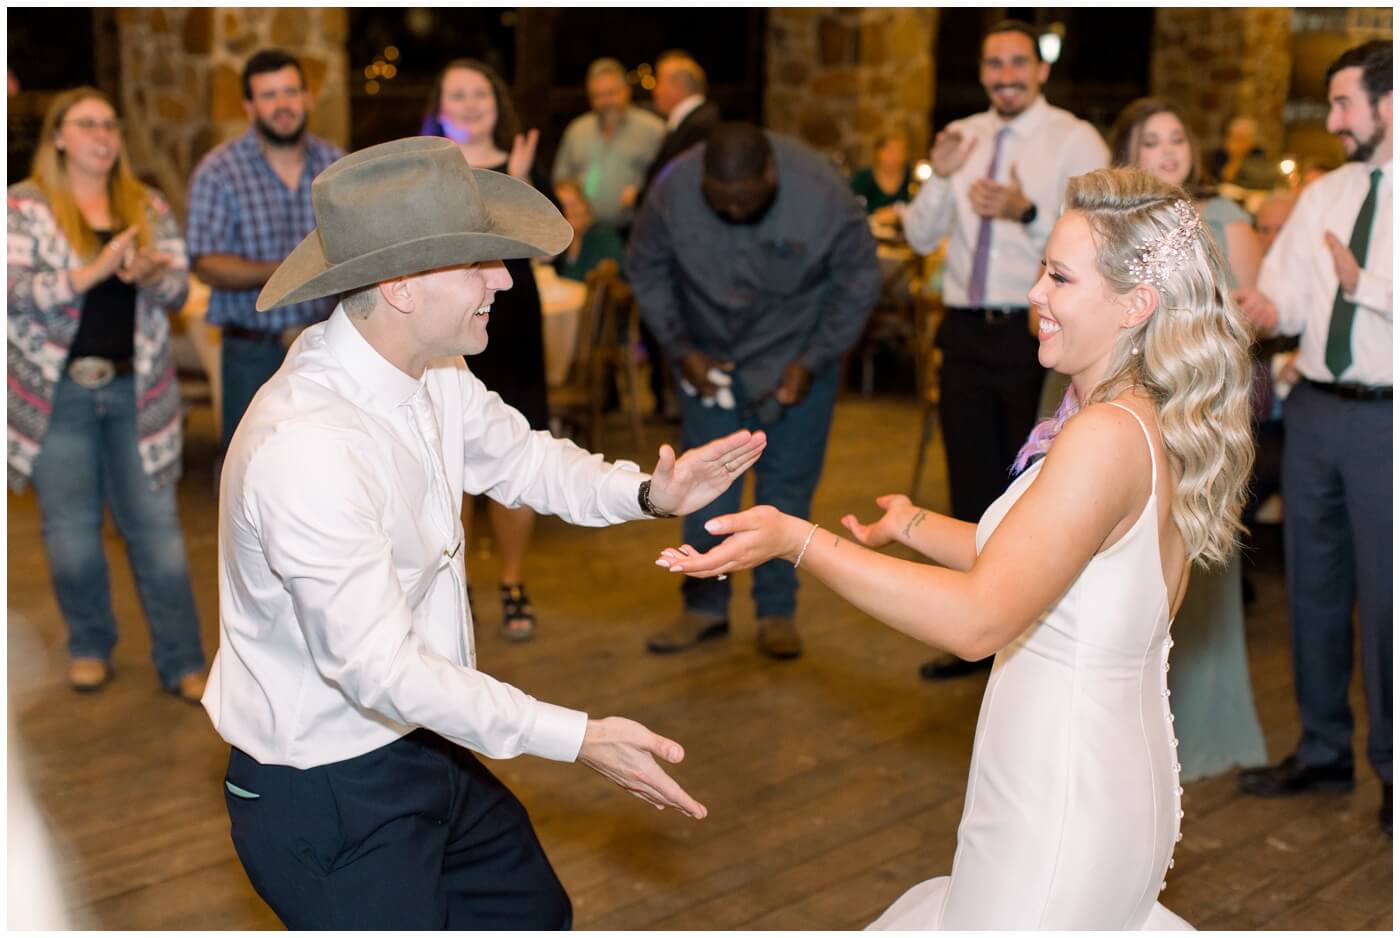 Houston Wedding at The Vine | the bride and groom laugh while dancing together